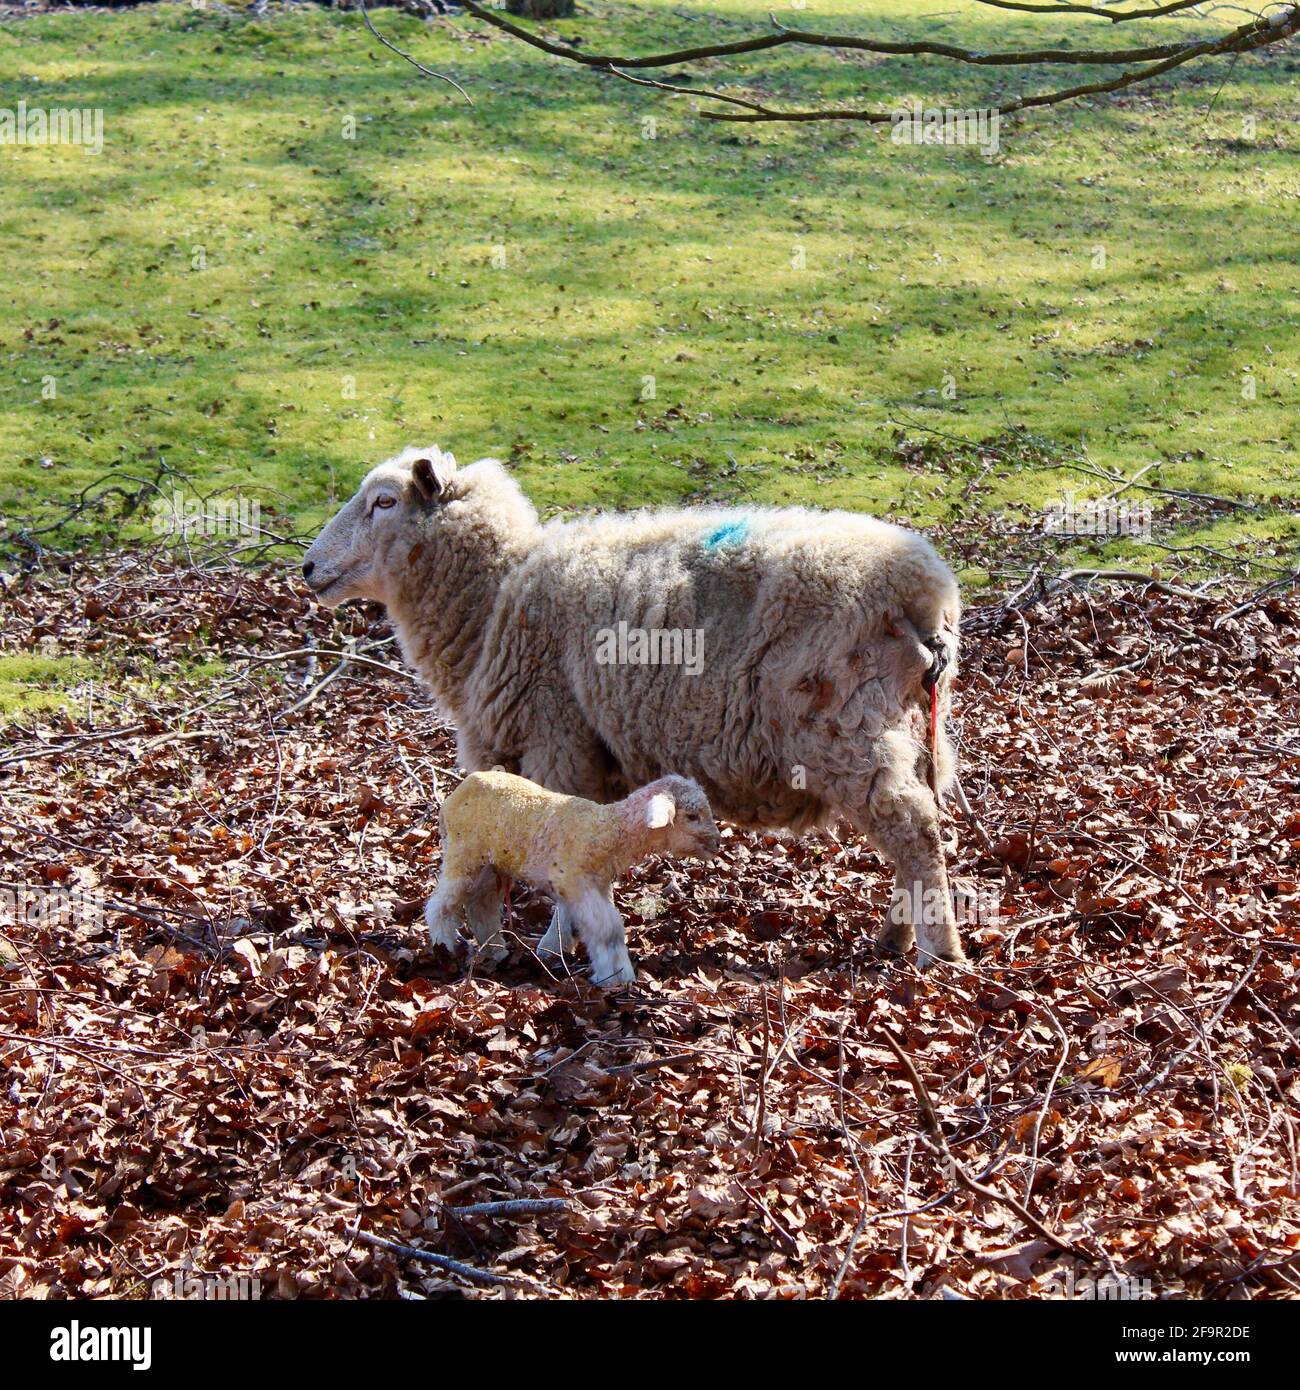 Wobbly legged addition to the world as this very recently born lamb sees the light of day for the first time. All seemed well with feeding in progress. Stock Photo